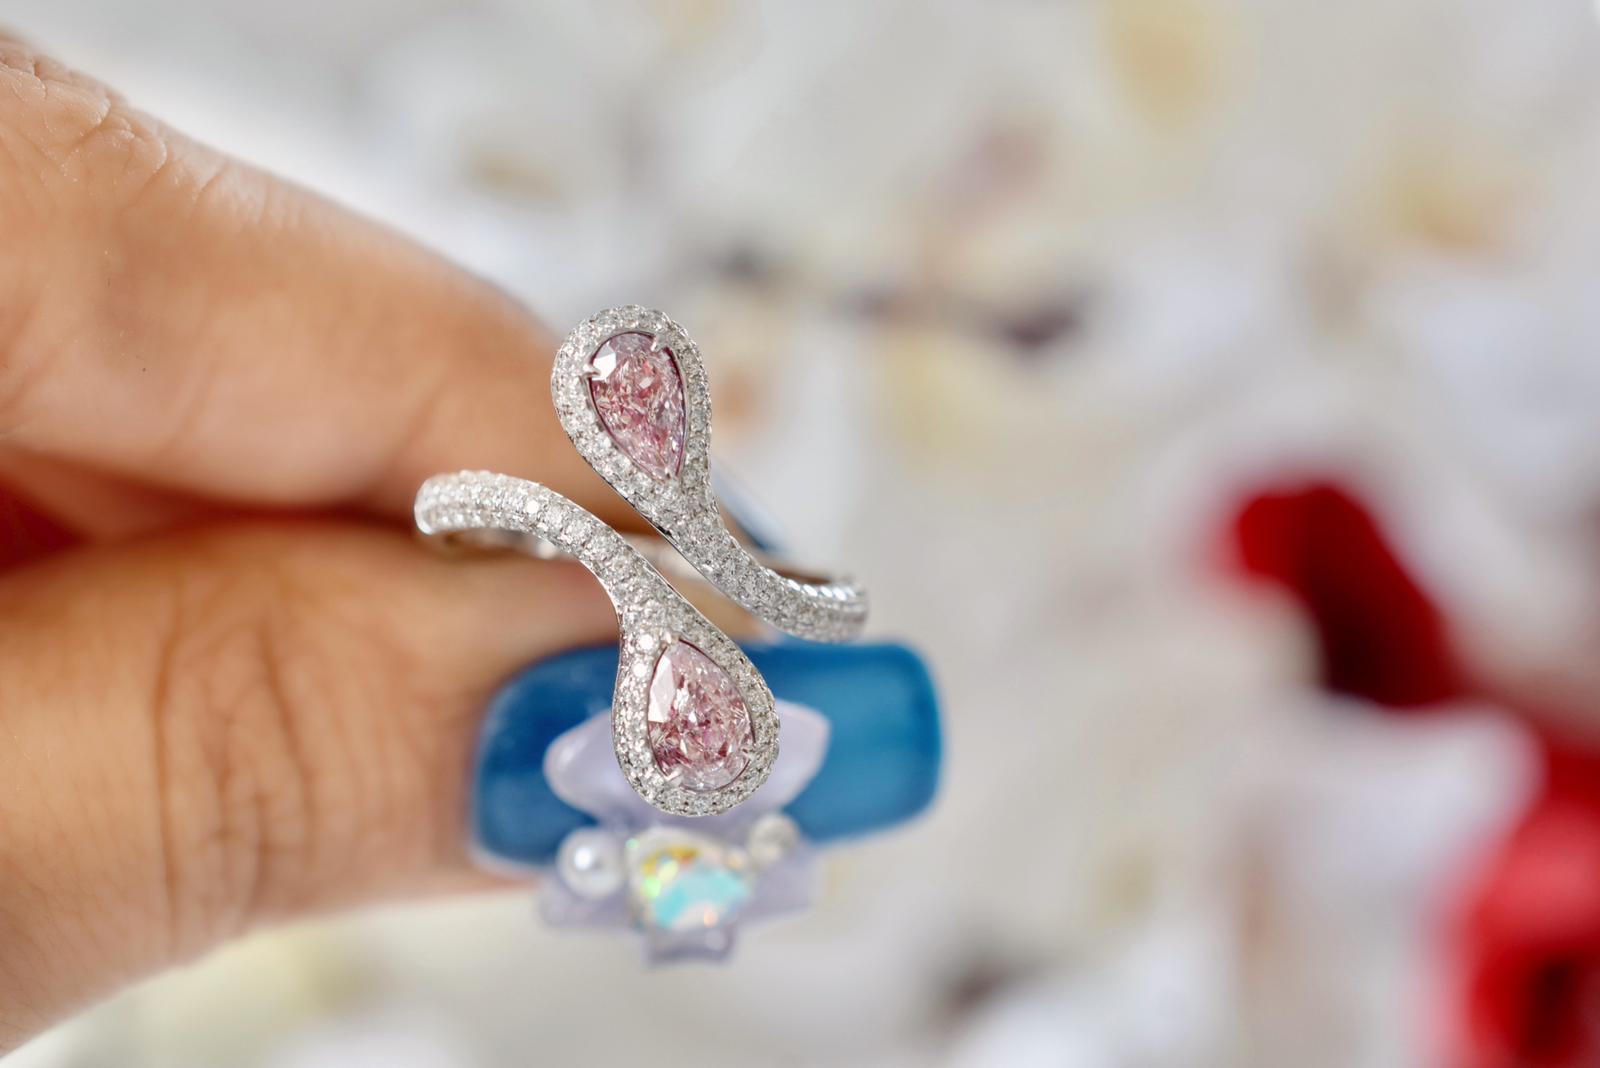 **100% NATURAL FANCY COLOUR DIAMOND JEWELLERIES**

✪ Jewelry Details ✪

♦ MAIN STONE DETAILS

Diamond 1-
➛ Stone Shape: Pear 
➛ Stone Color: Faint Pink
➛ Stone Weight: 0.42 carats
➛ Clarity: SI2
➛ GIA certified

Diamond 2-
➛ Stone Shape: Pear
➛